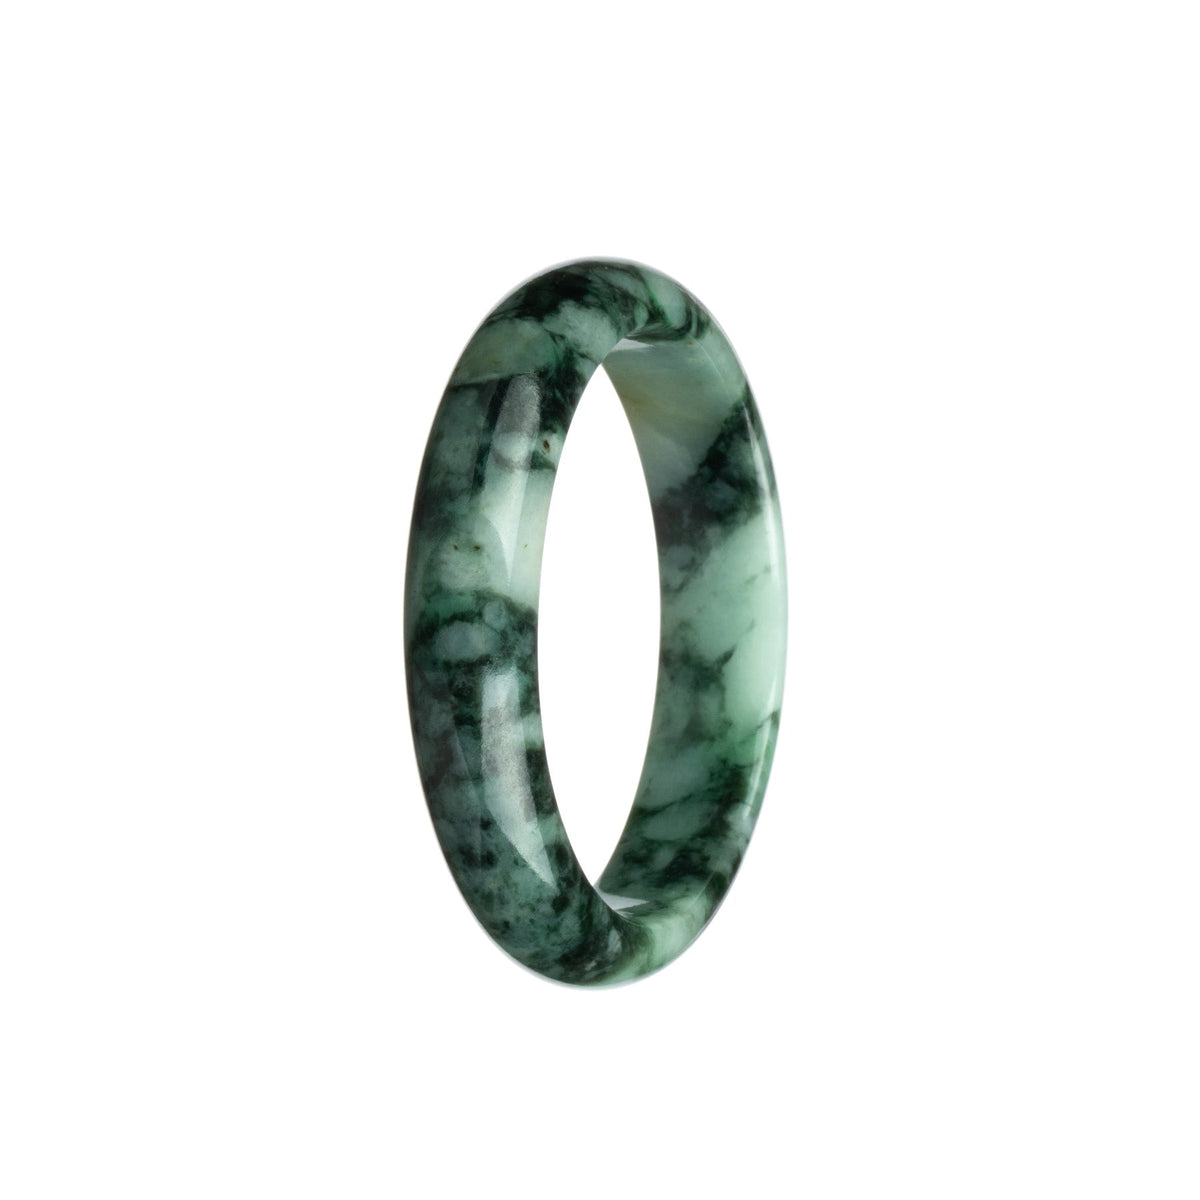 A close-up of a real grade A pale green jade bangle bracelet with a dark green pattern. The bracelet is in the shape of a half moon and measures 54mm in diameter. Created by MAYS GEMS.